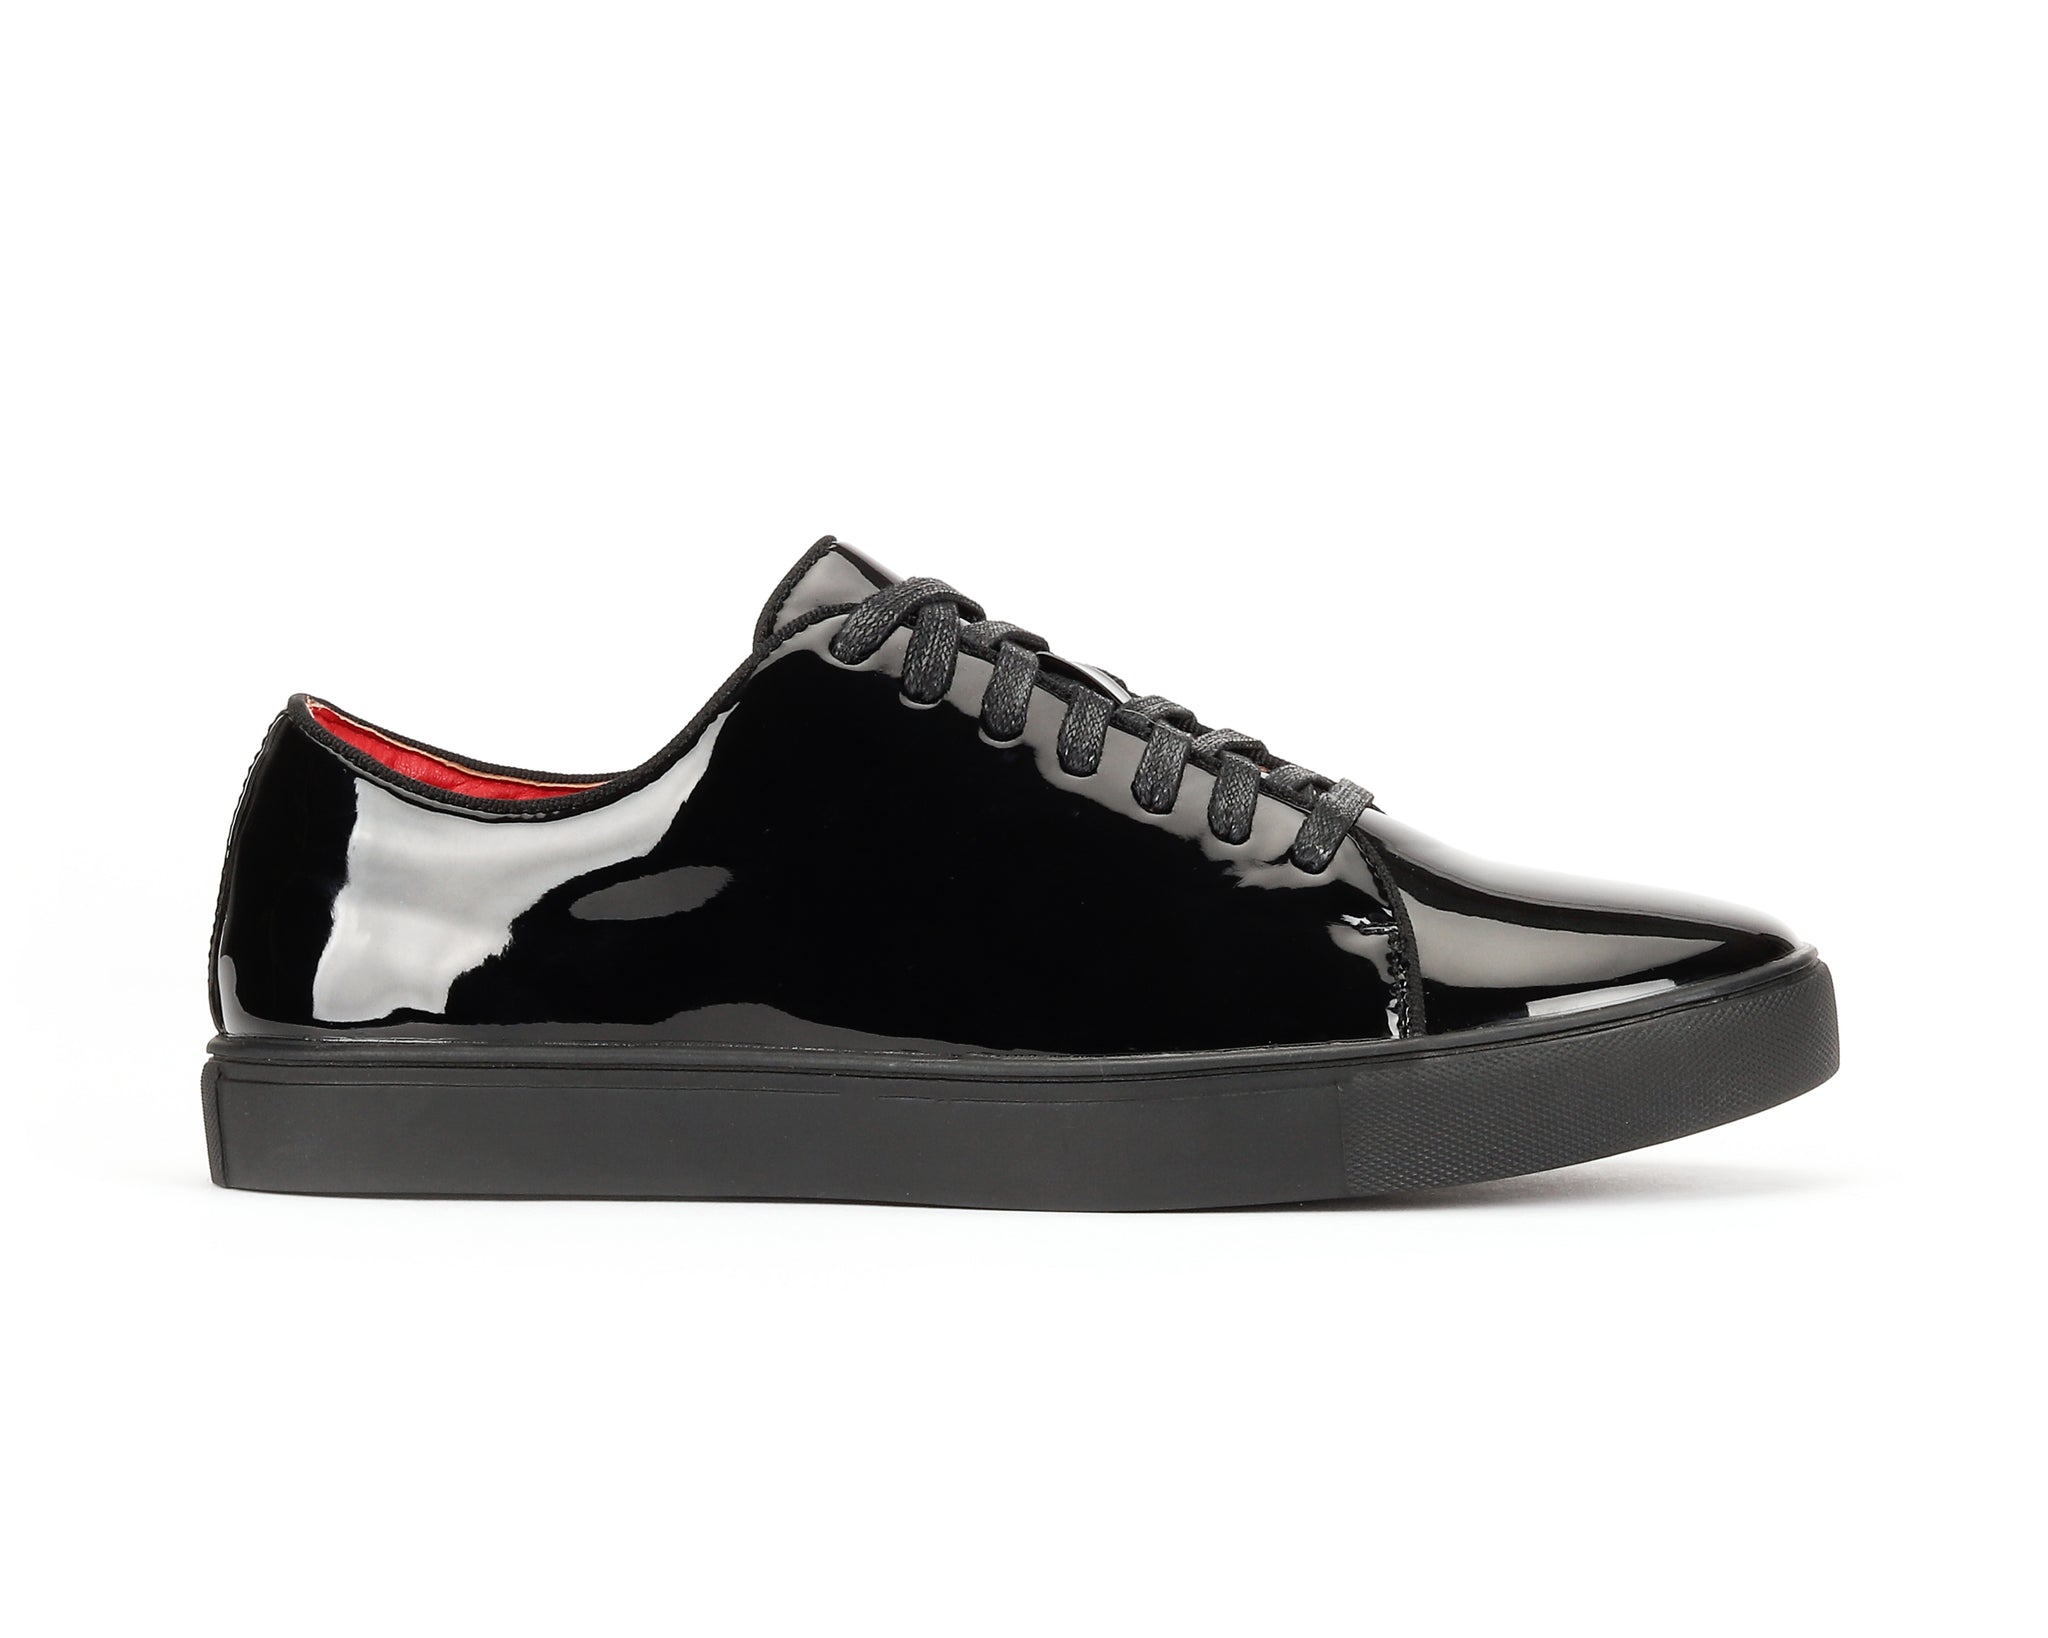 MENS PATENT LEATHER SNEAKER